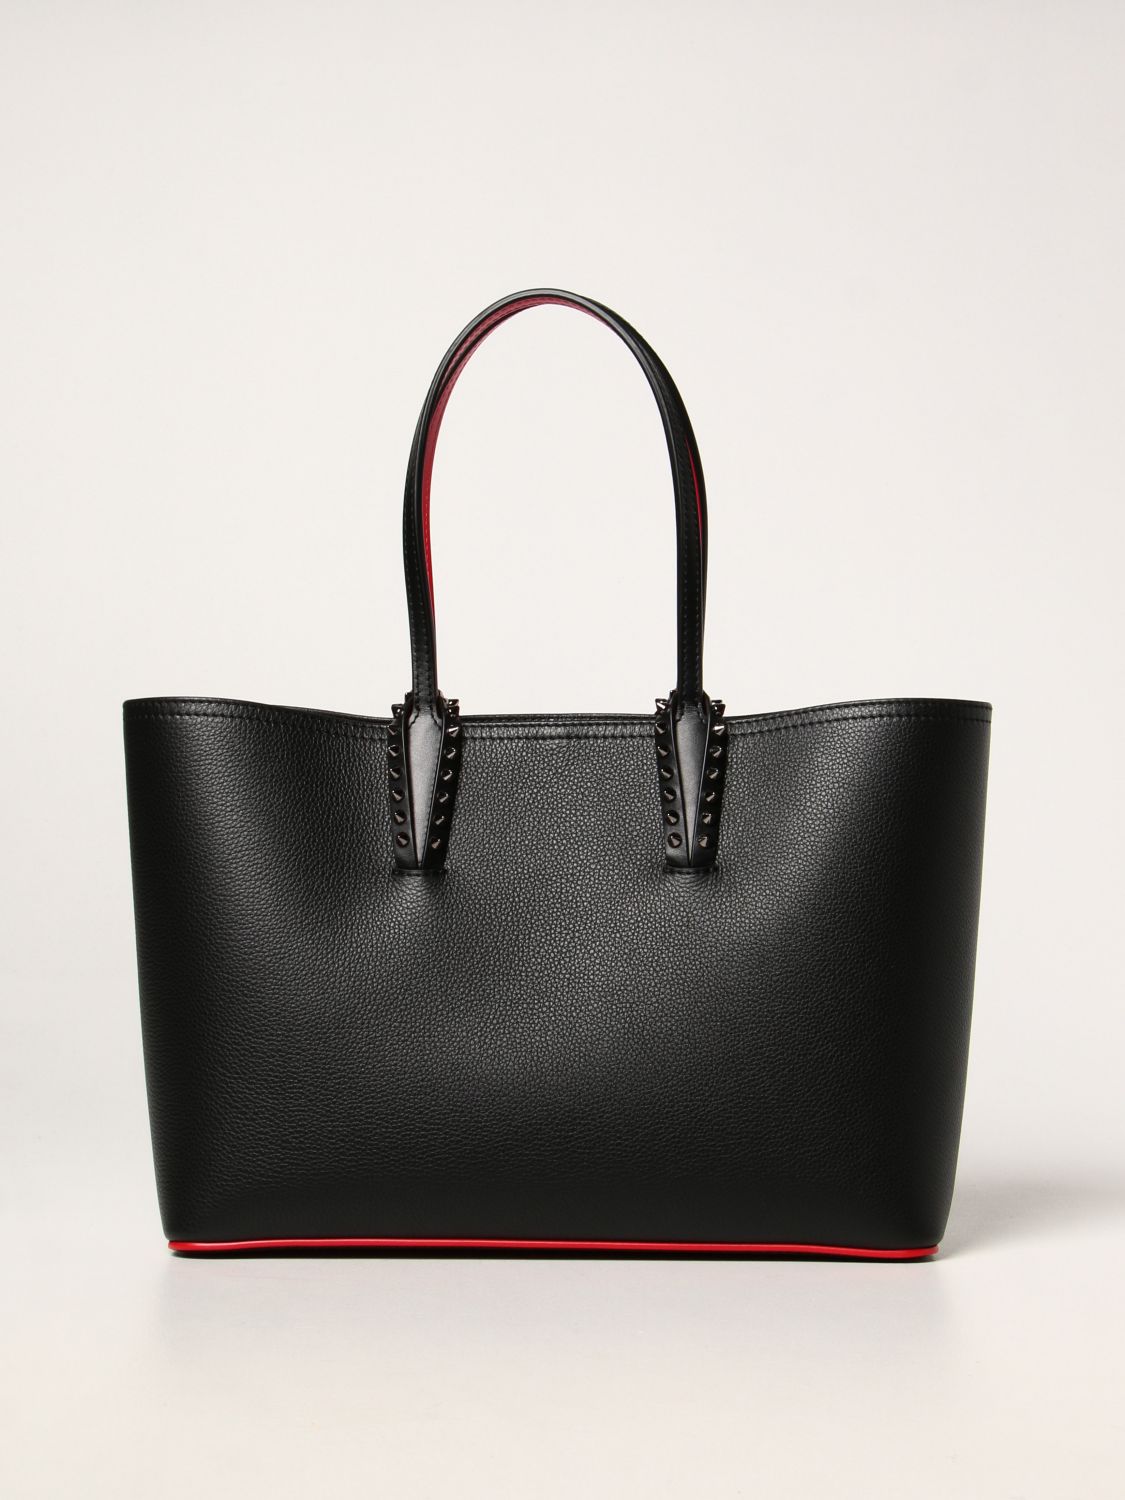 CHRISTIAN LOUBOUTIN: Cabata bag in leather with spikes | Tote Bags ...